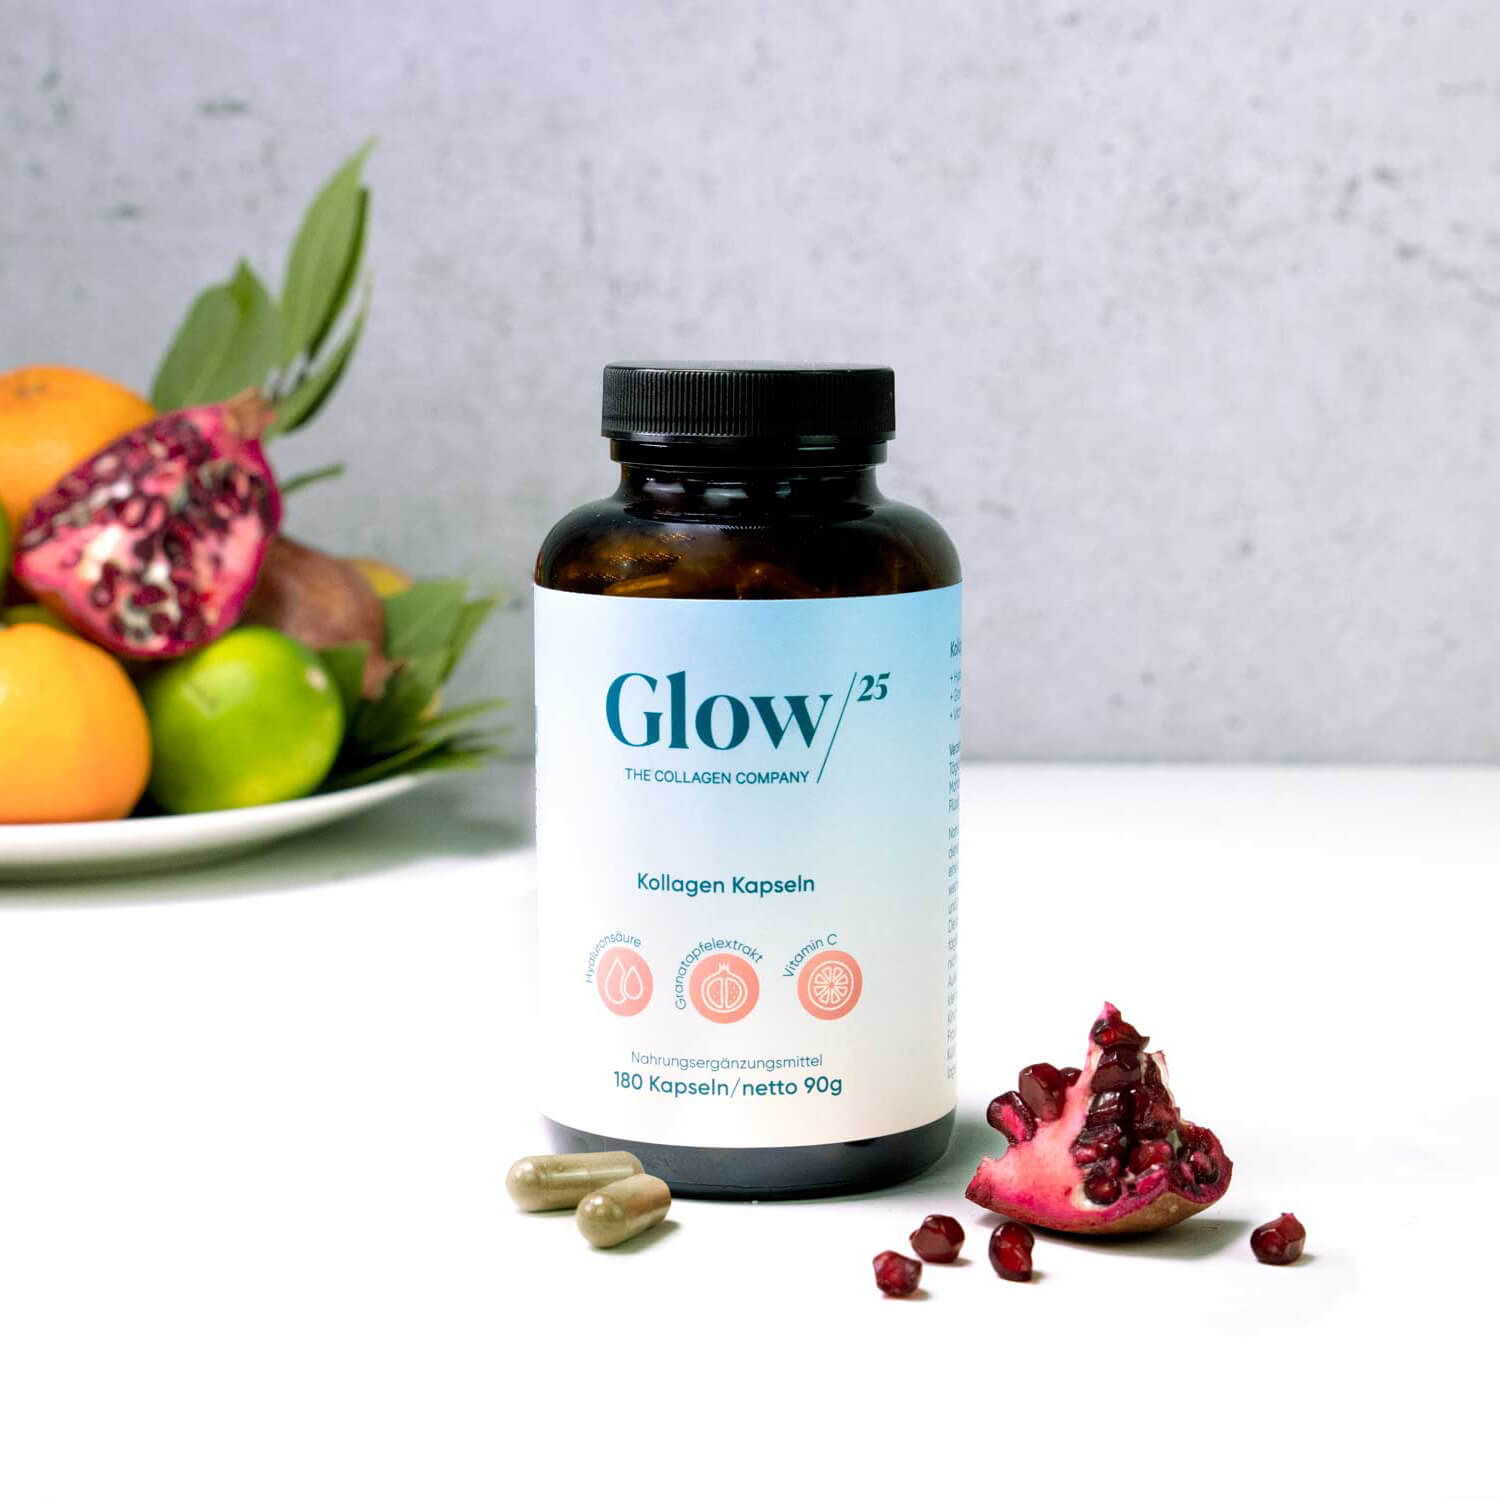 Glow collagen capsules and powder